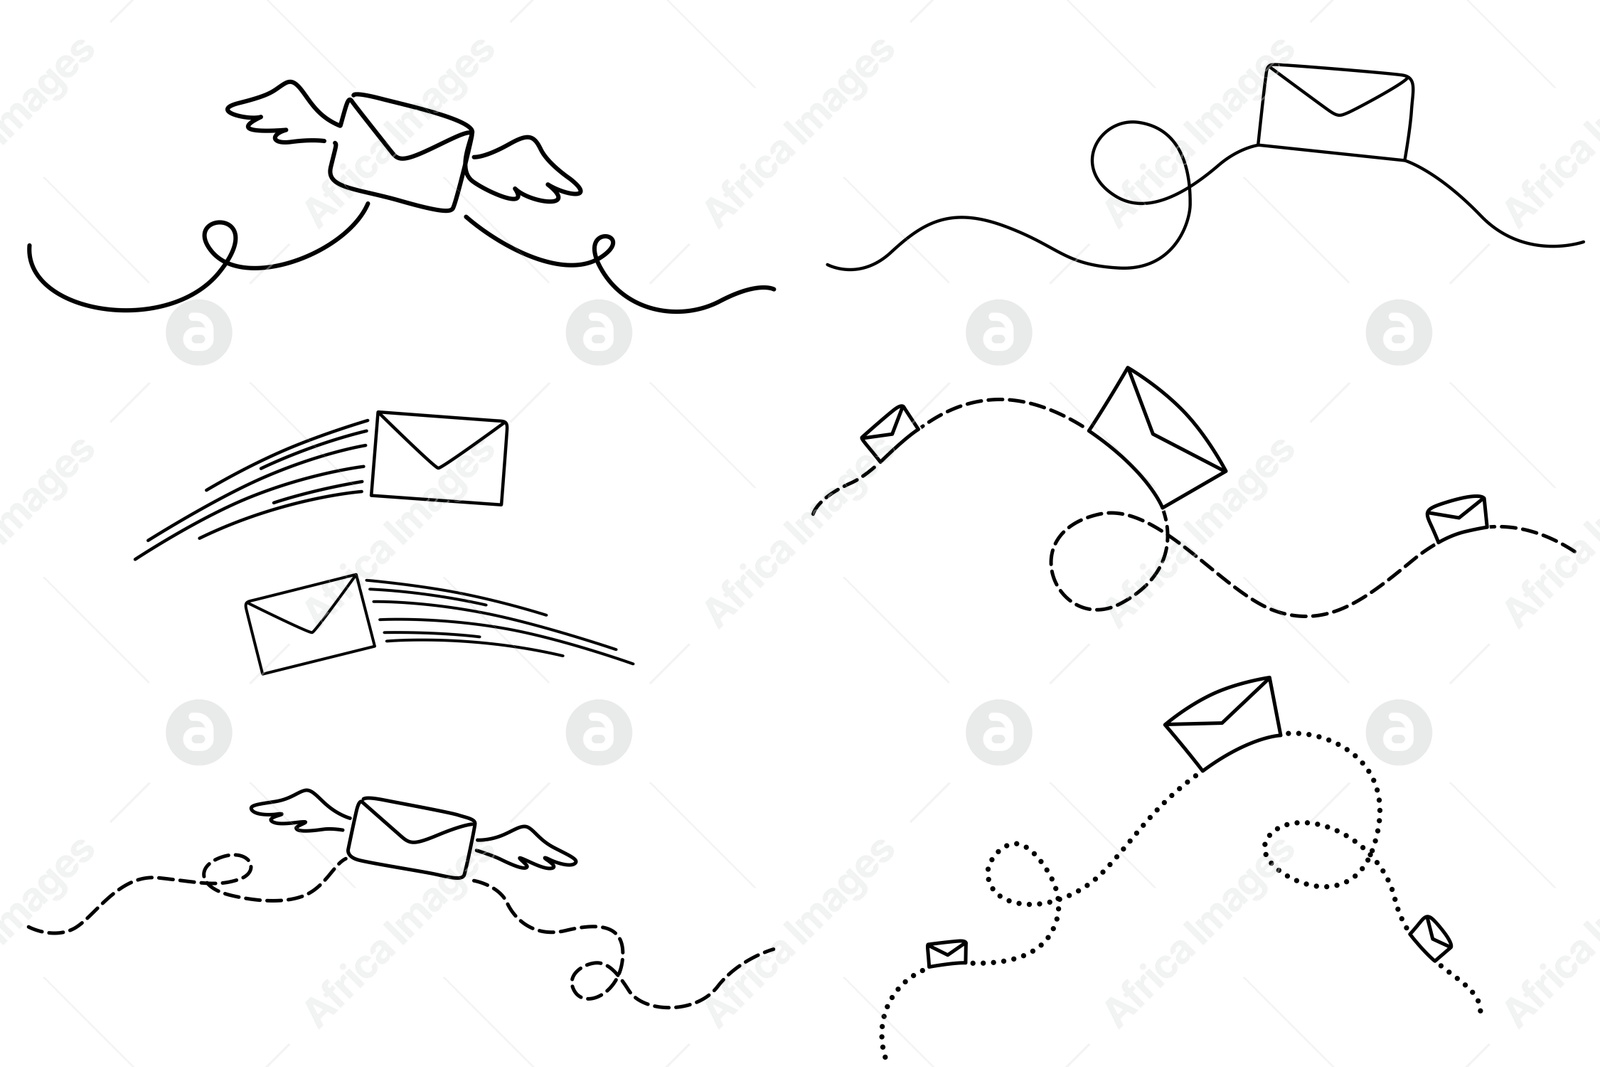 Image of Sending message. Drawing of different envelopes on white background